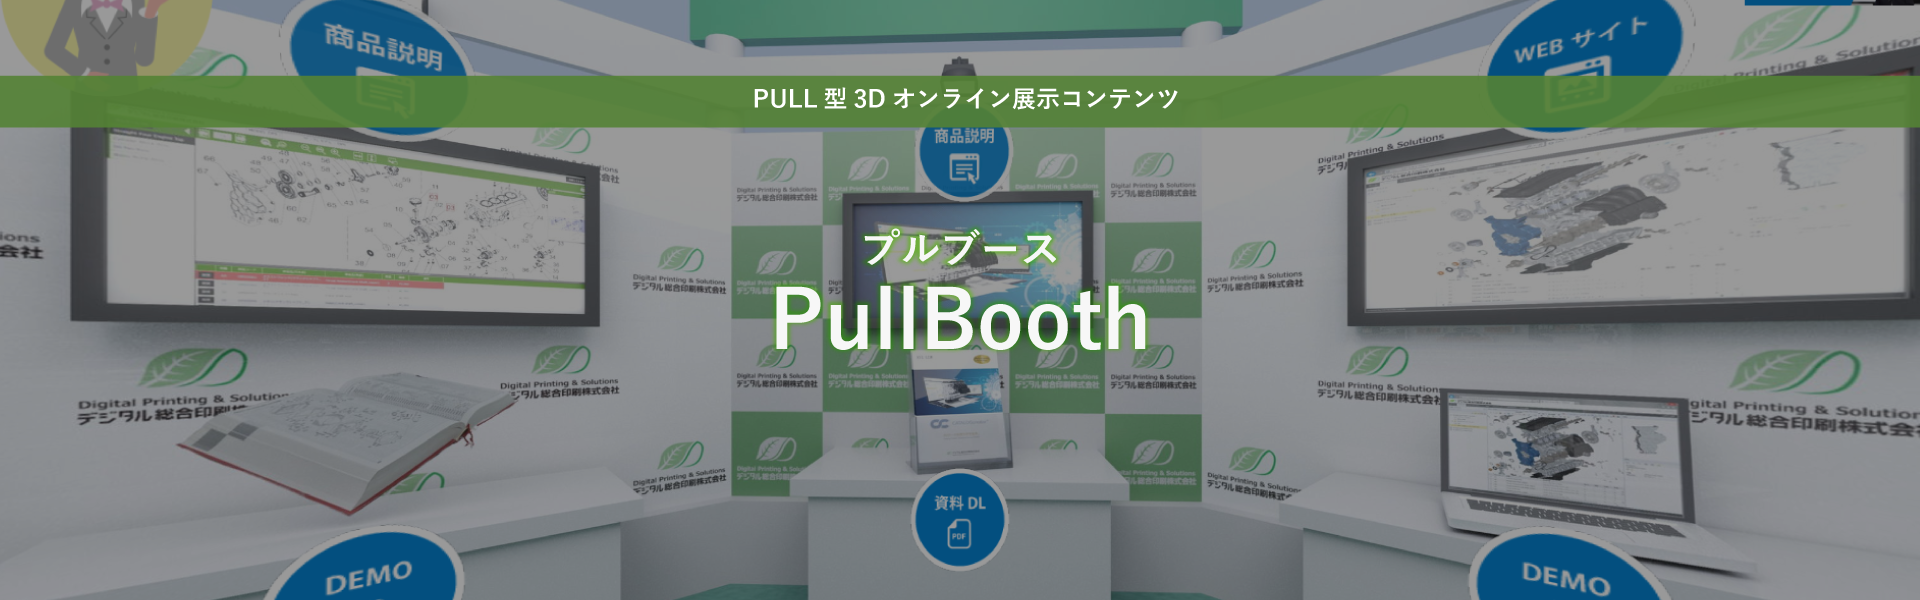 Pull Booth